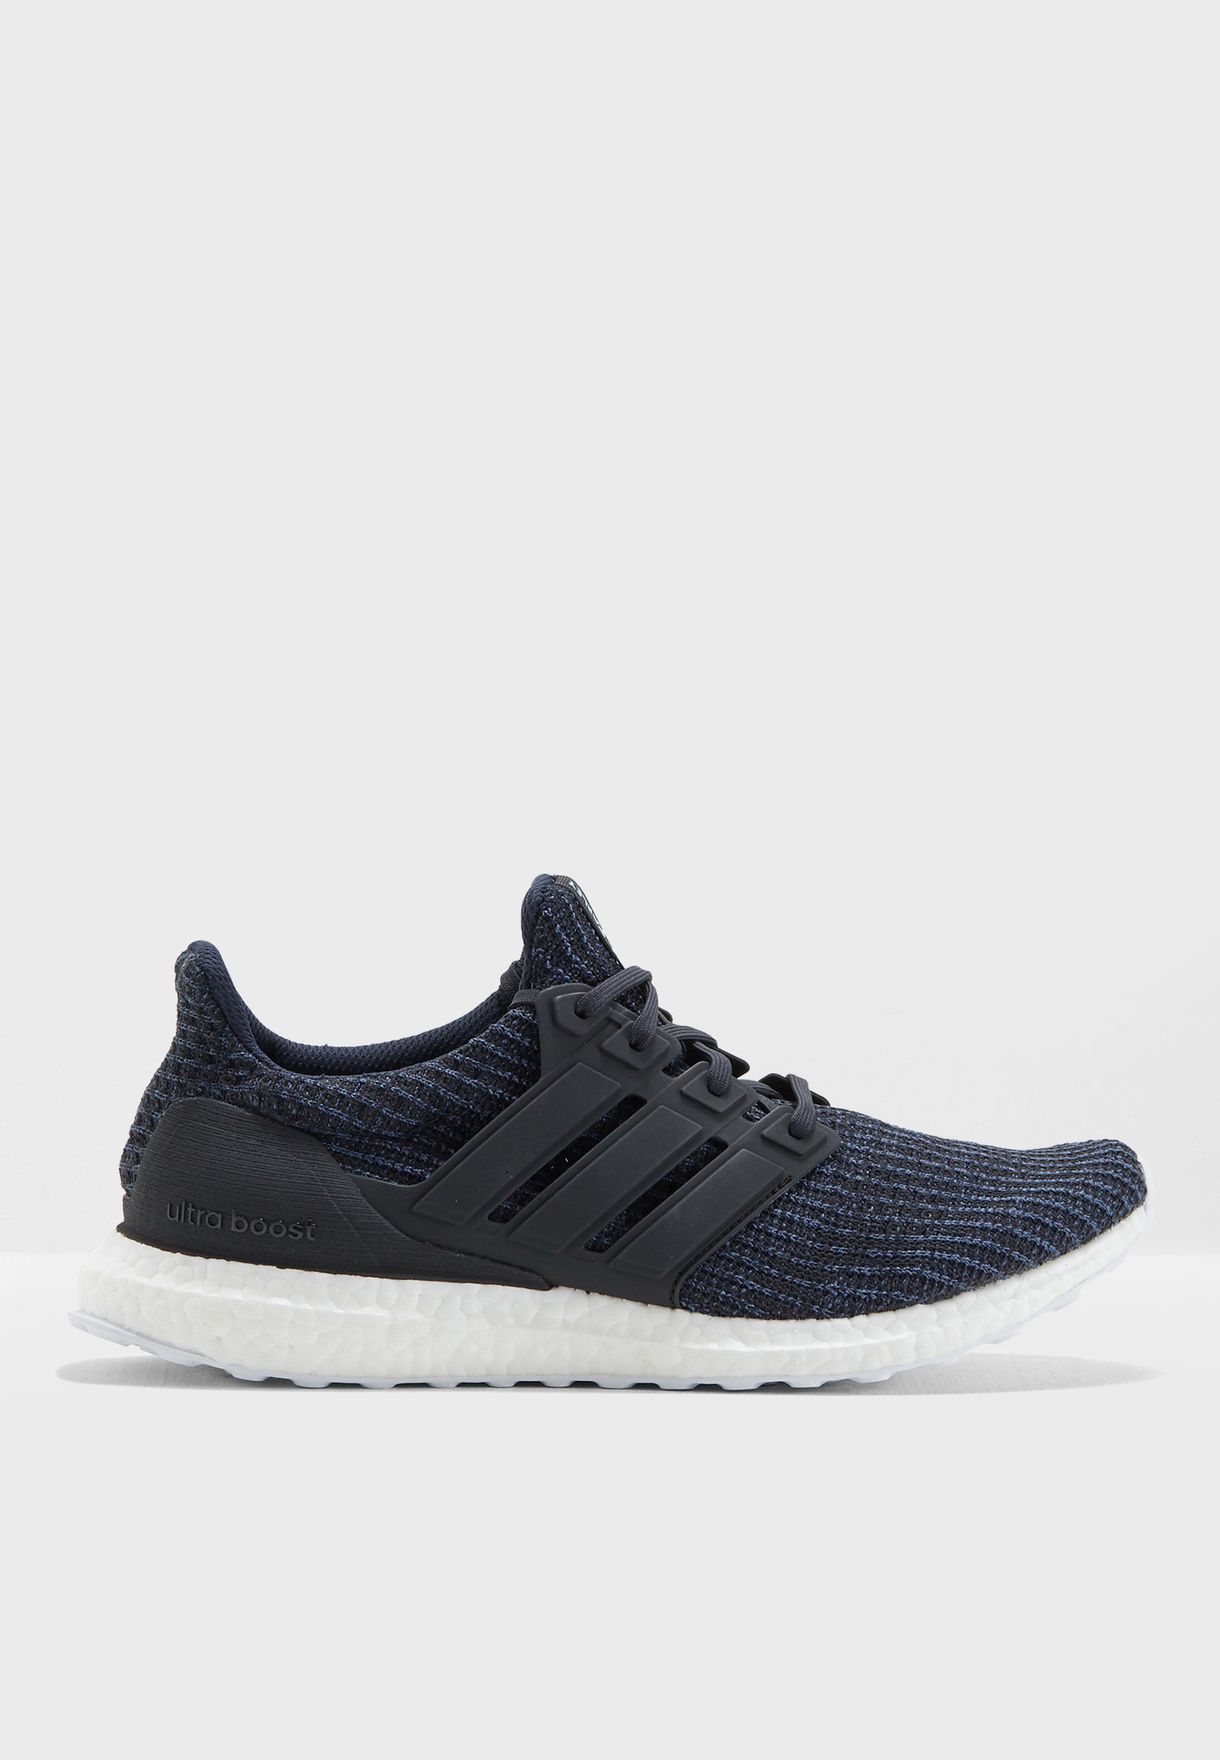 adidas men's ultra boost parley running shoes